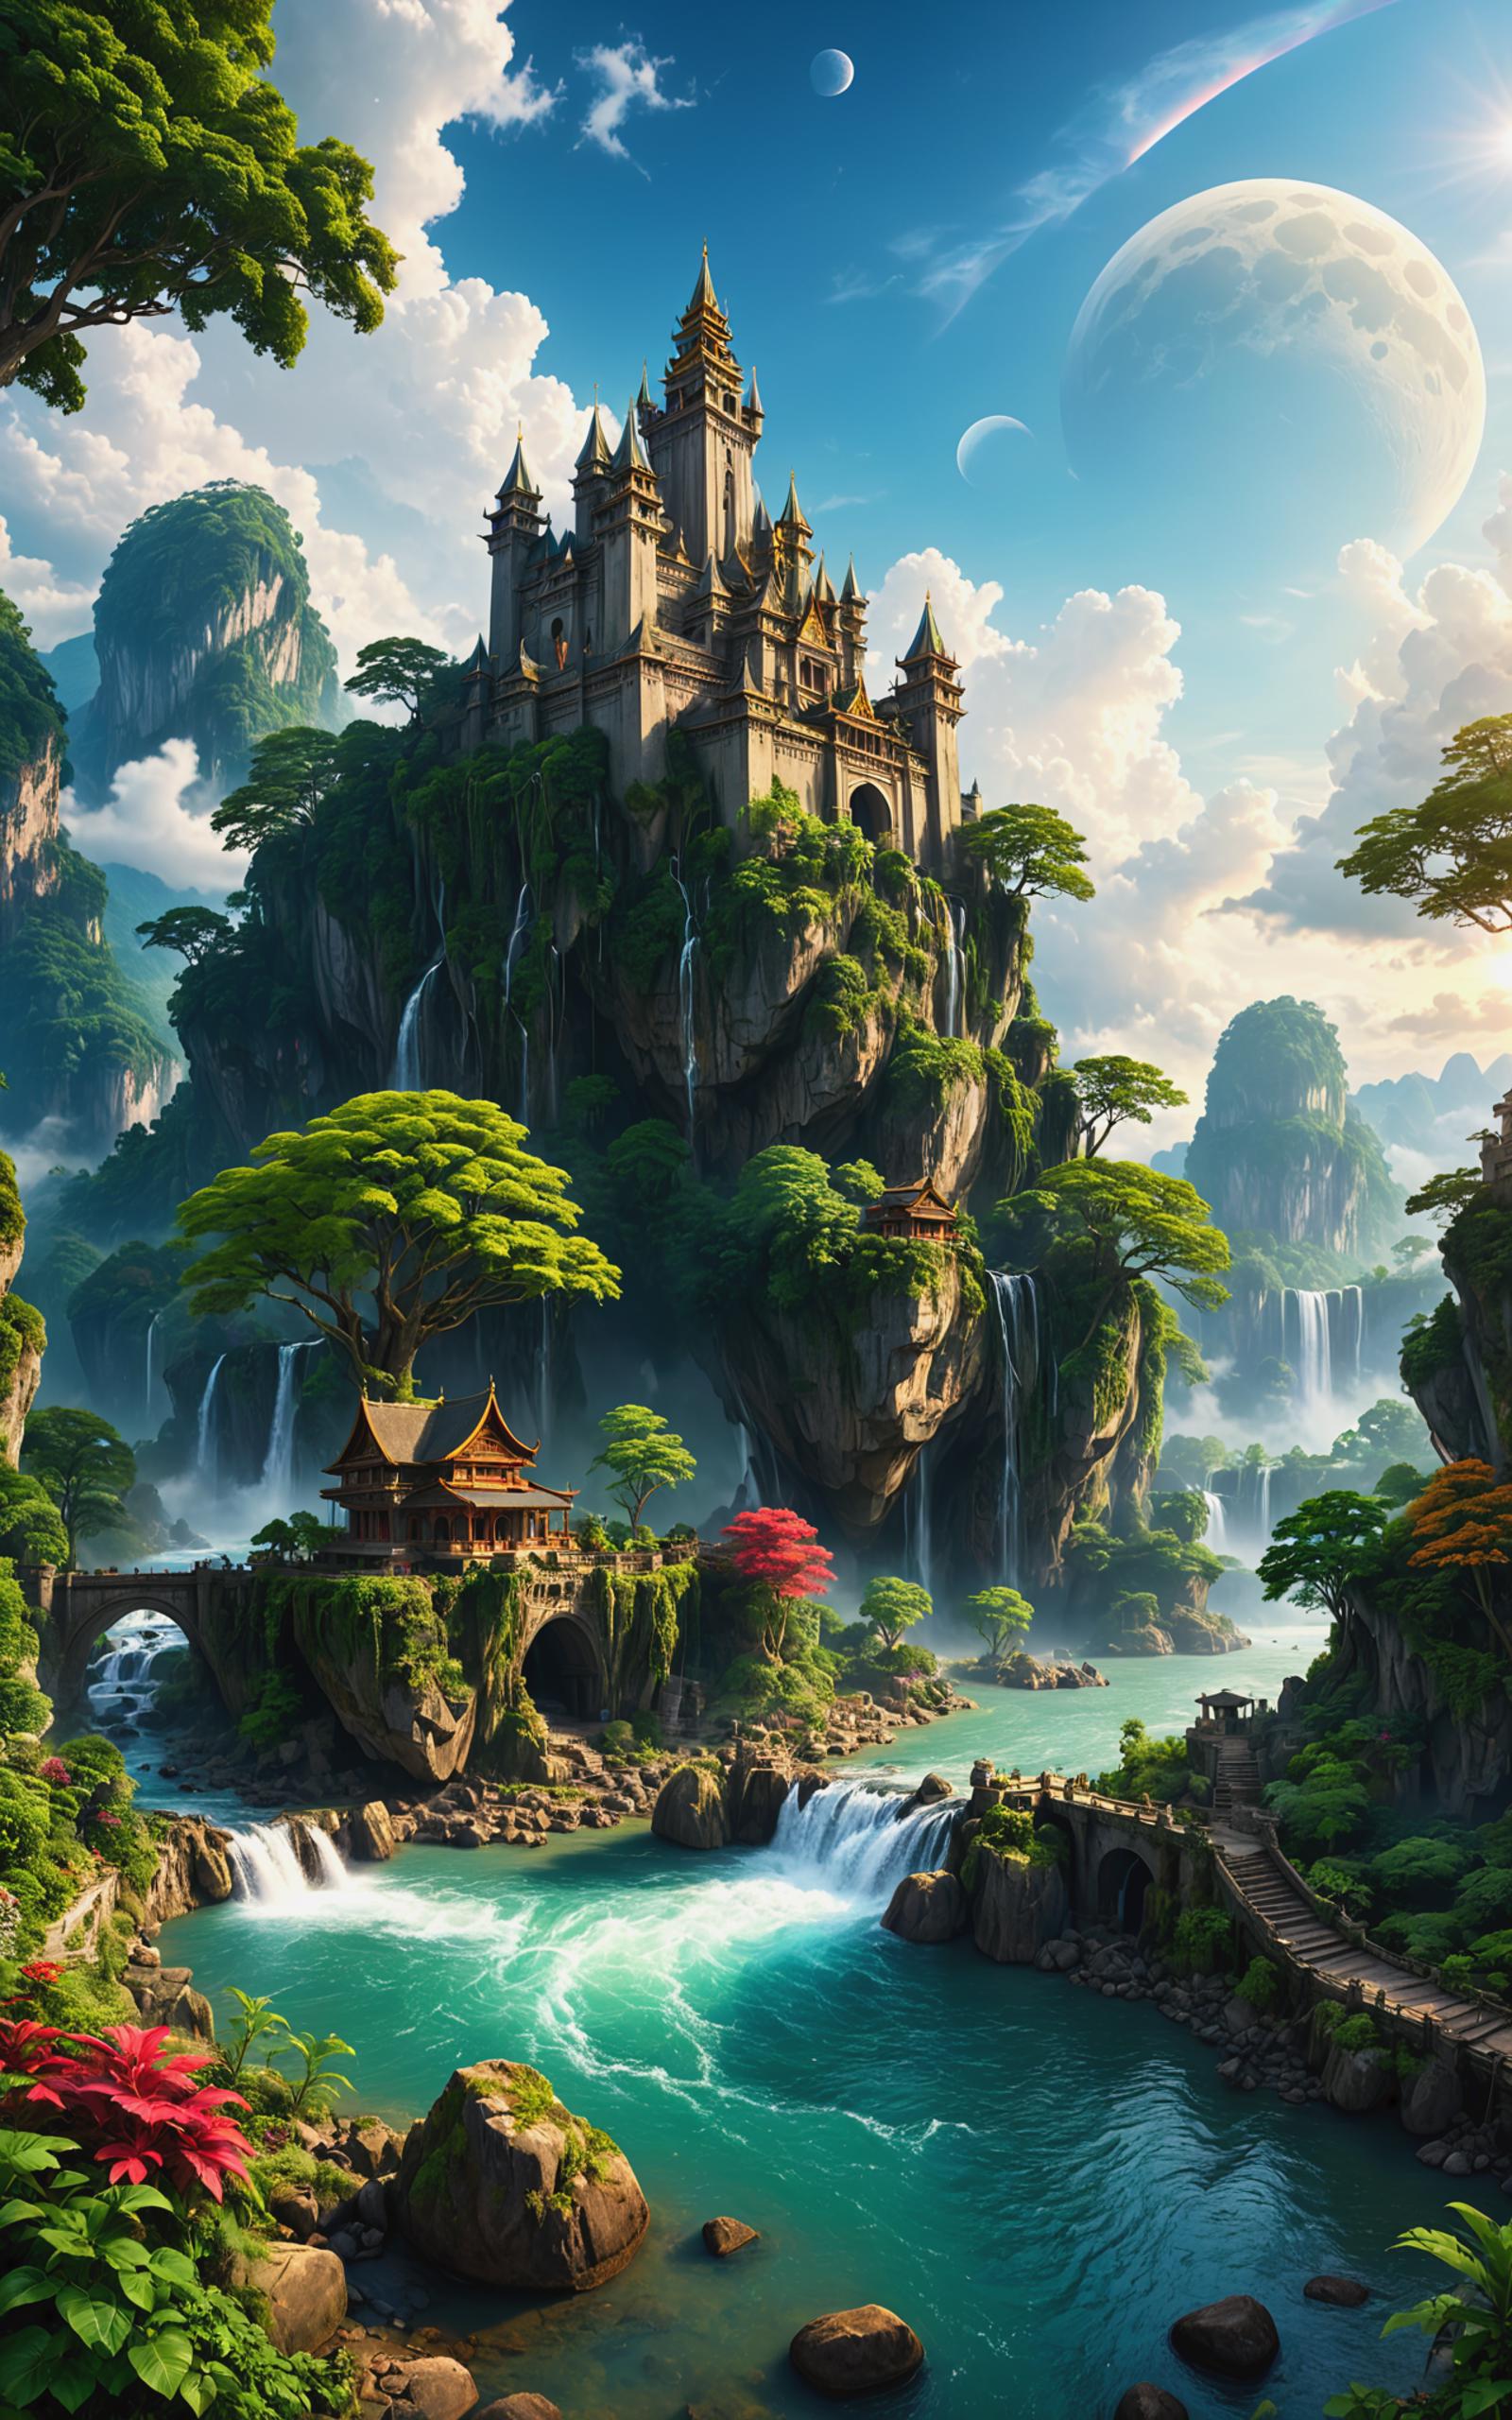 Artistic Illustration of a Castle Amidst a Mountainous Landscape with Waterfall and Trees